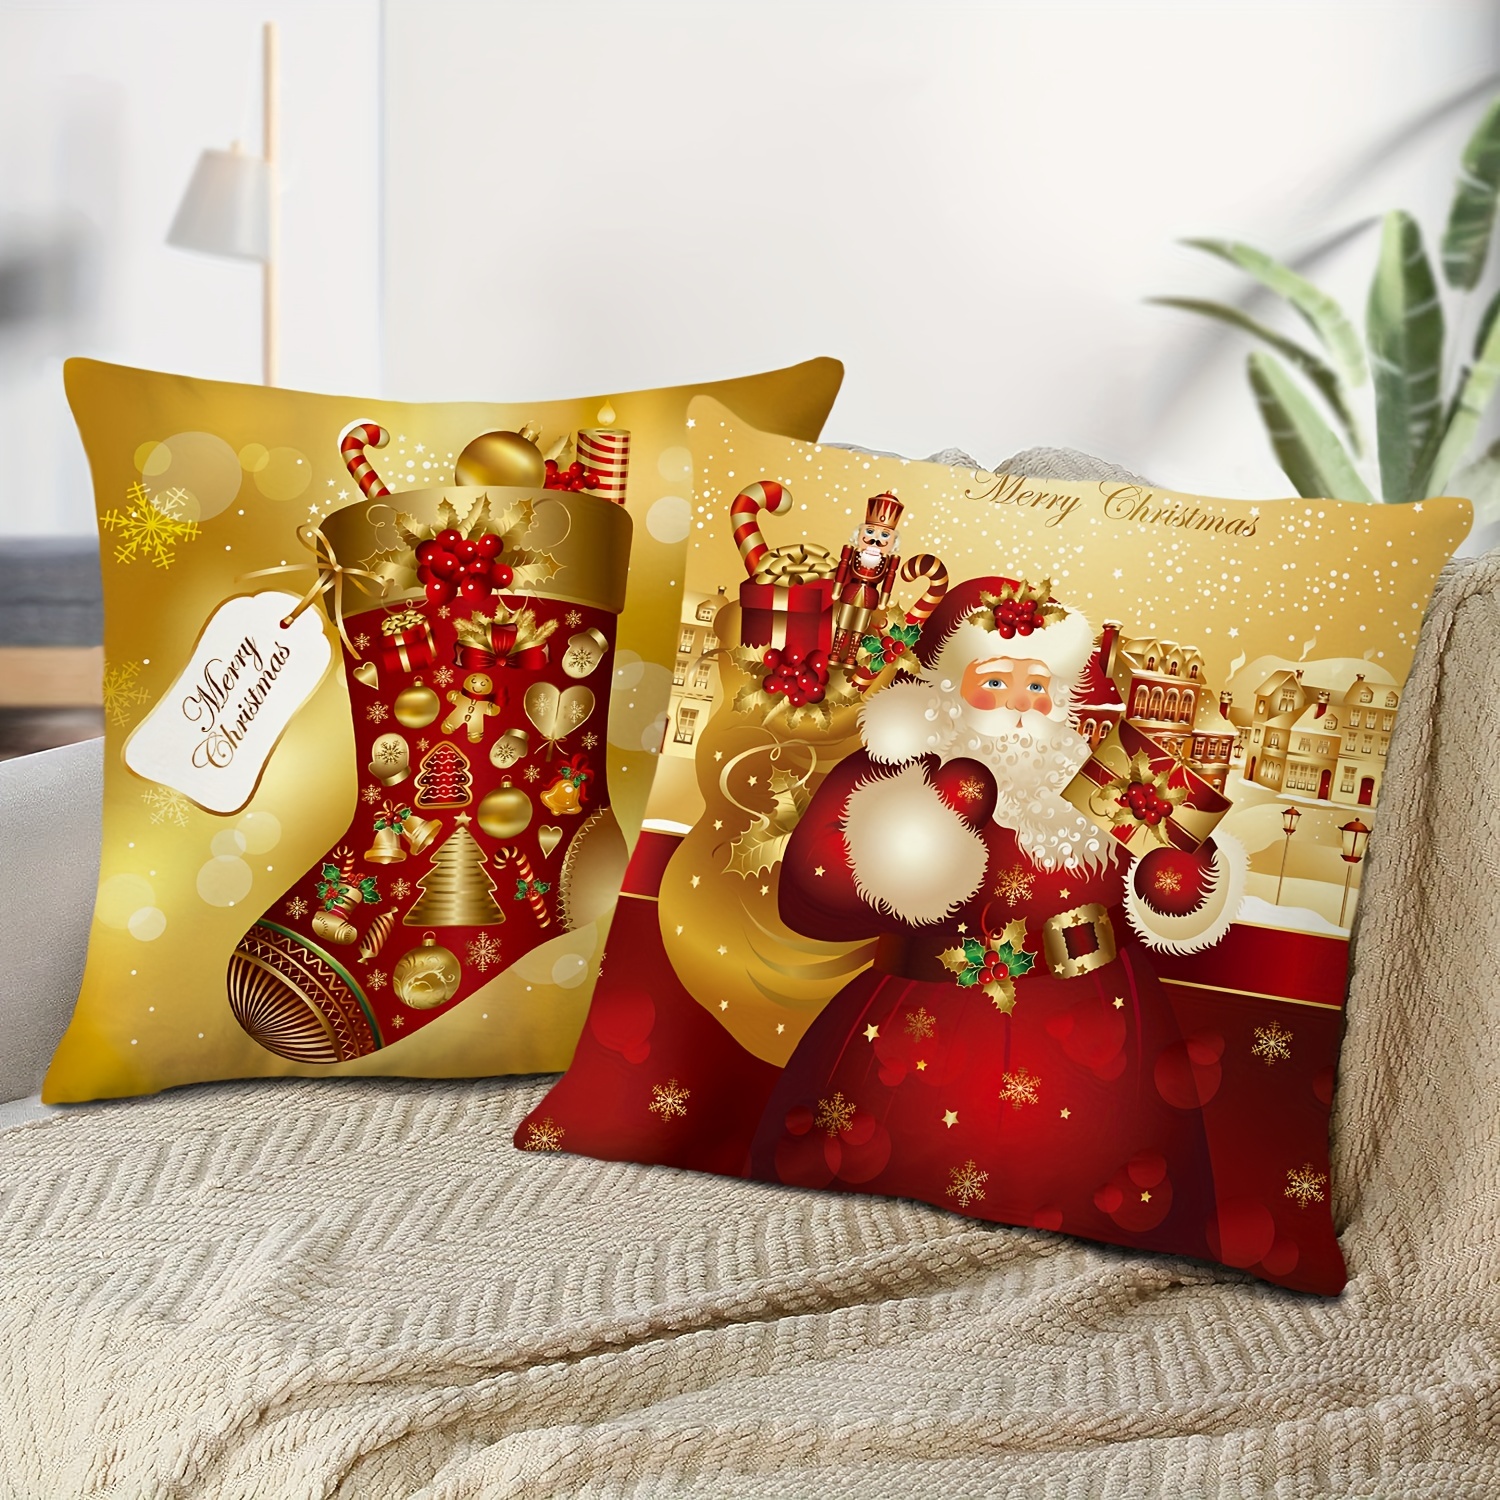 Merry Red Holiday Throw Pillow